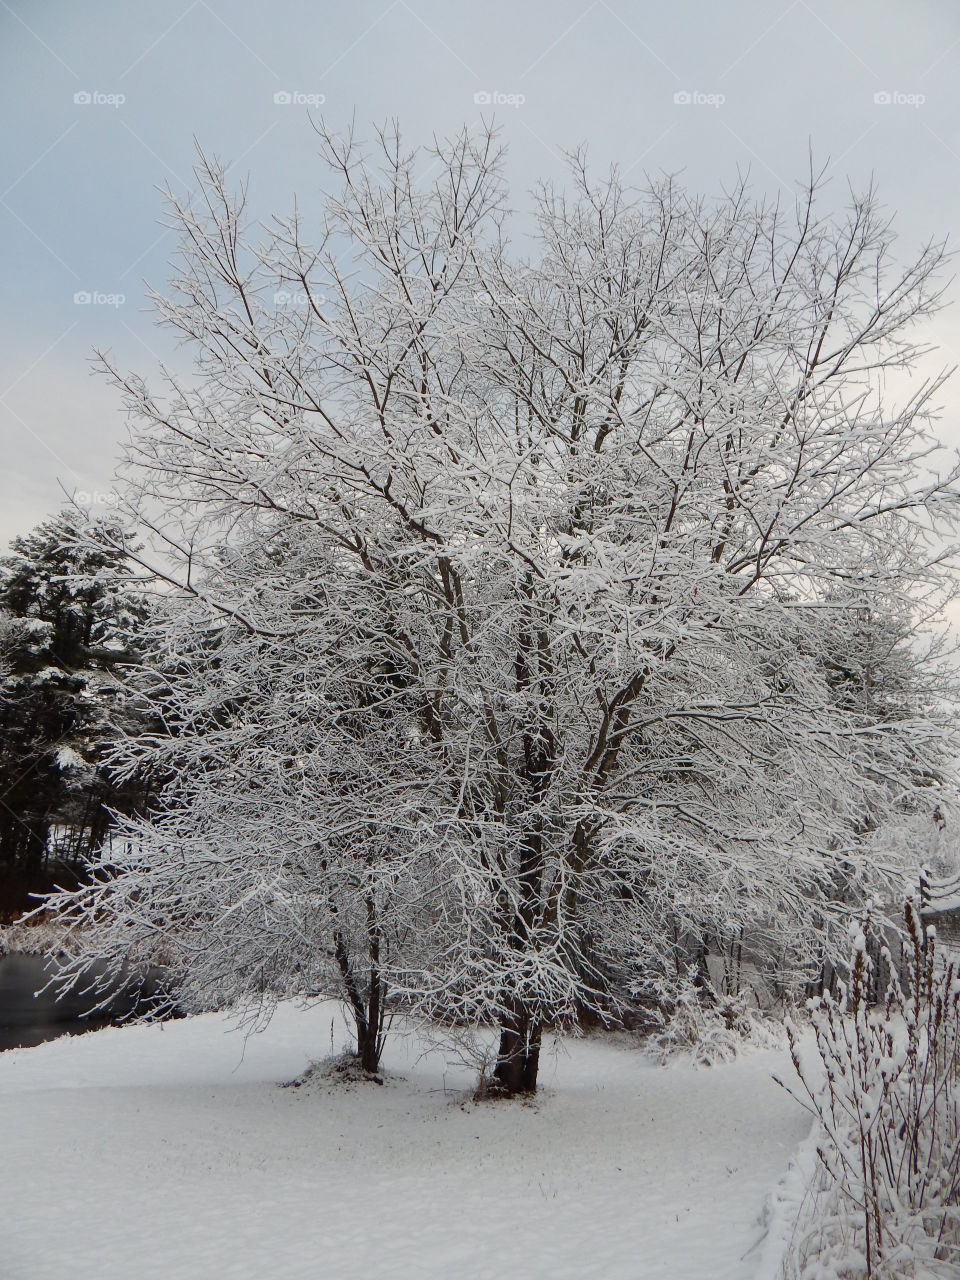 Snowy Day in Northern Maine - November 2015